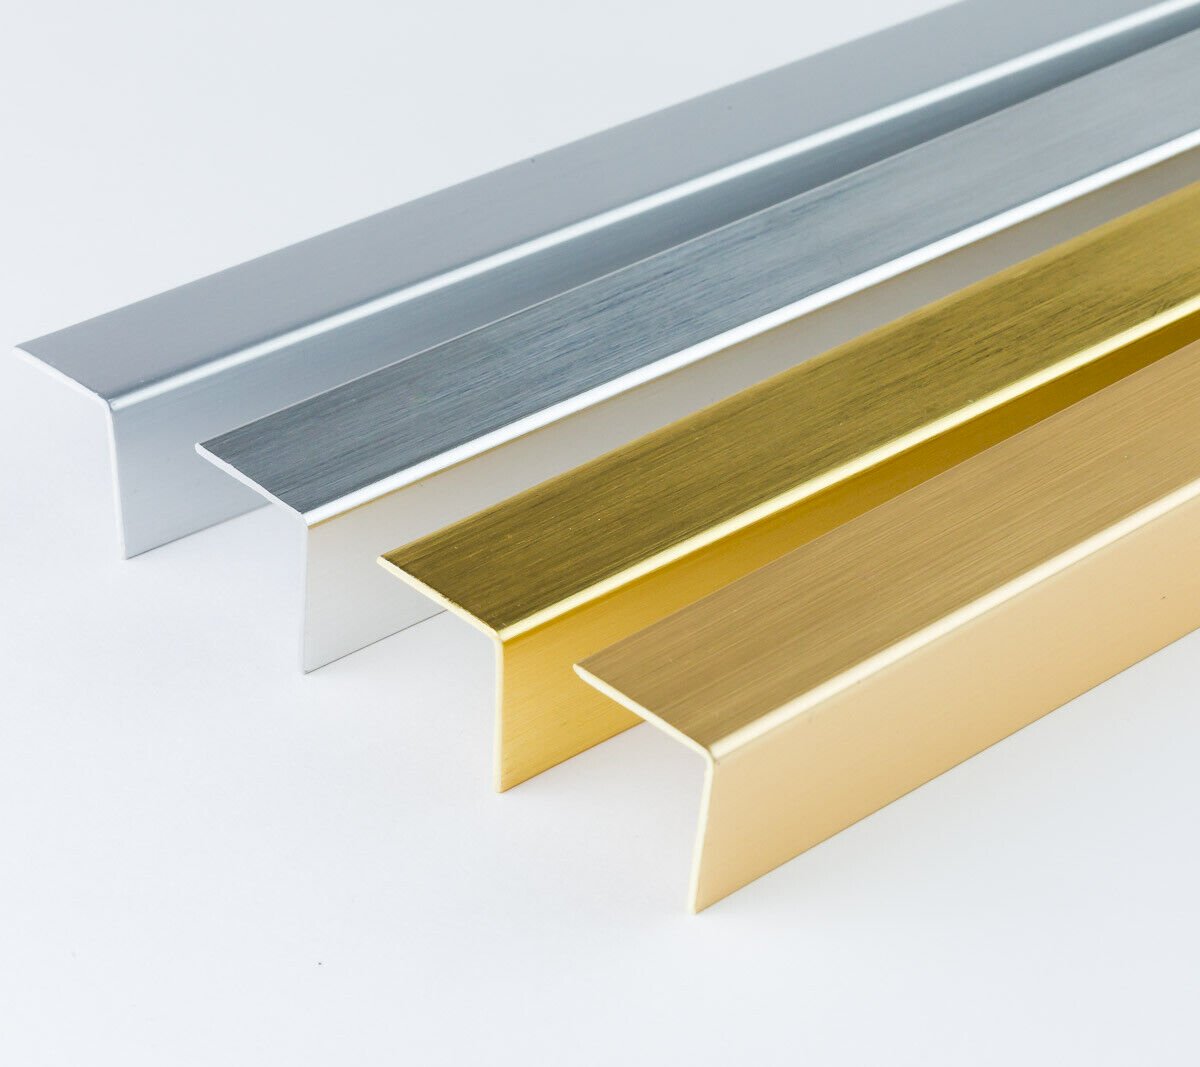 20mm x 10mm Gold and Silver PVC  Corner 90 Degree Angle Trim